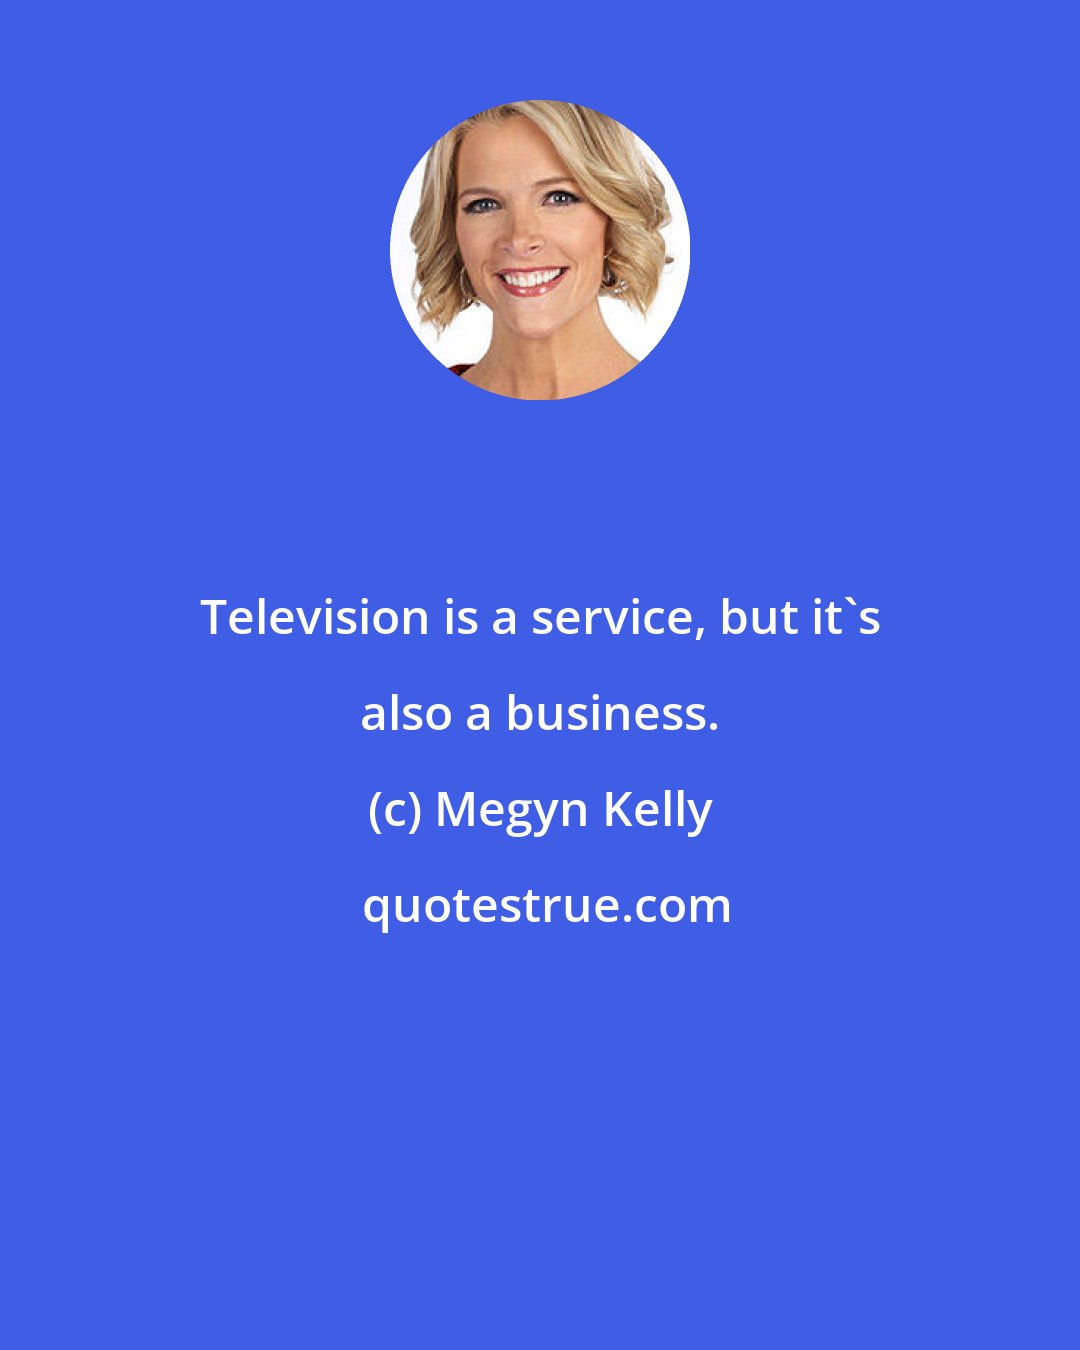 Megyn Kelly: Television is a service, but it's also a business.